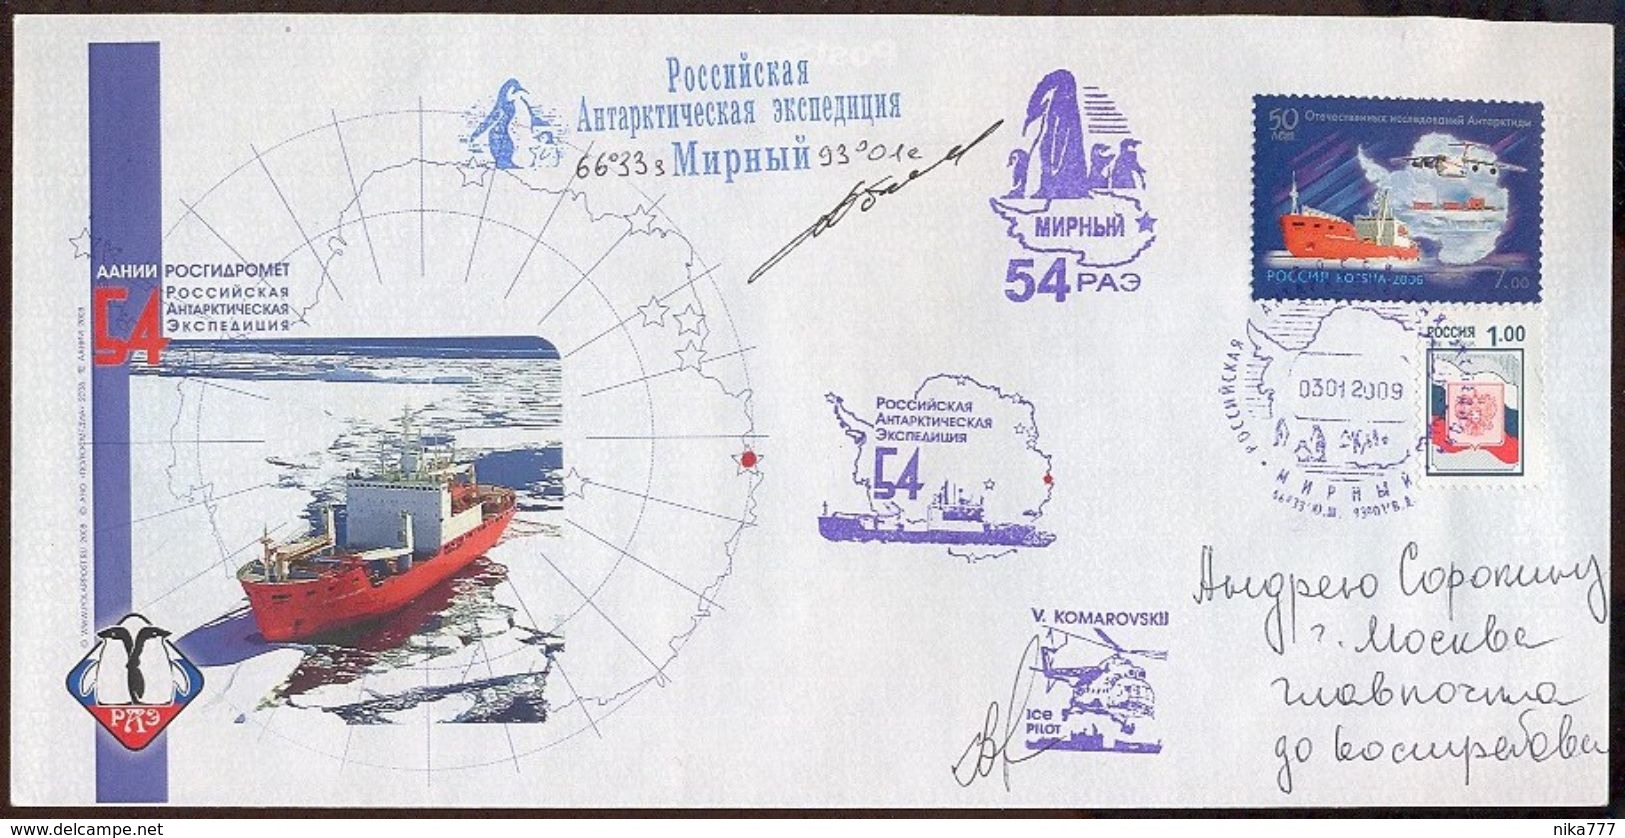 ANTARCTIC Pole Station Mirny RAE-54 Mail Used Cover USSR RUSSIA POLAR Helicopter Penguin - Research Stations